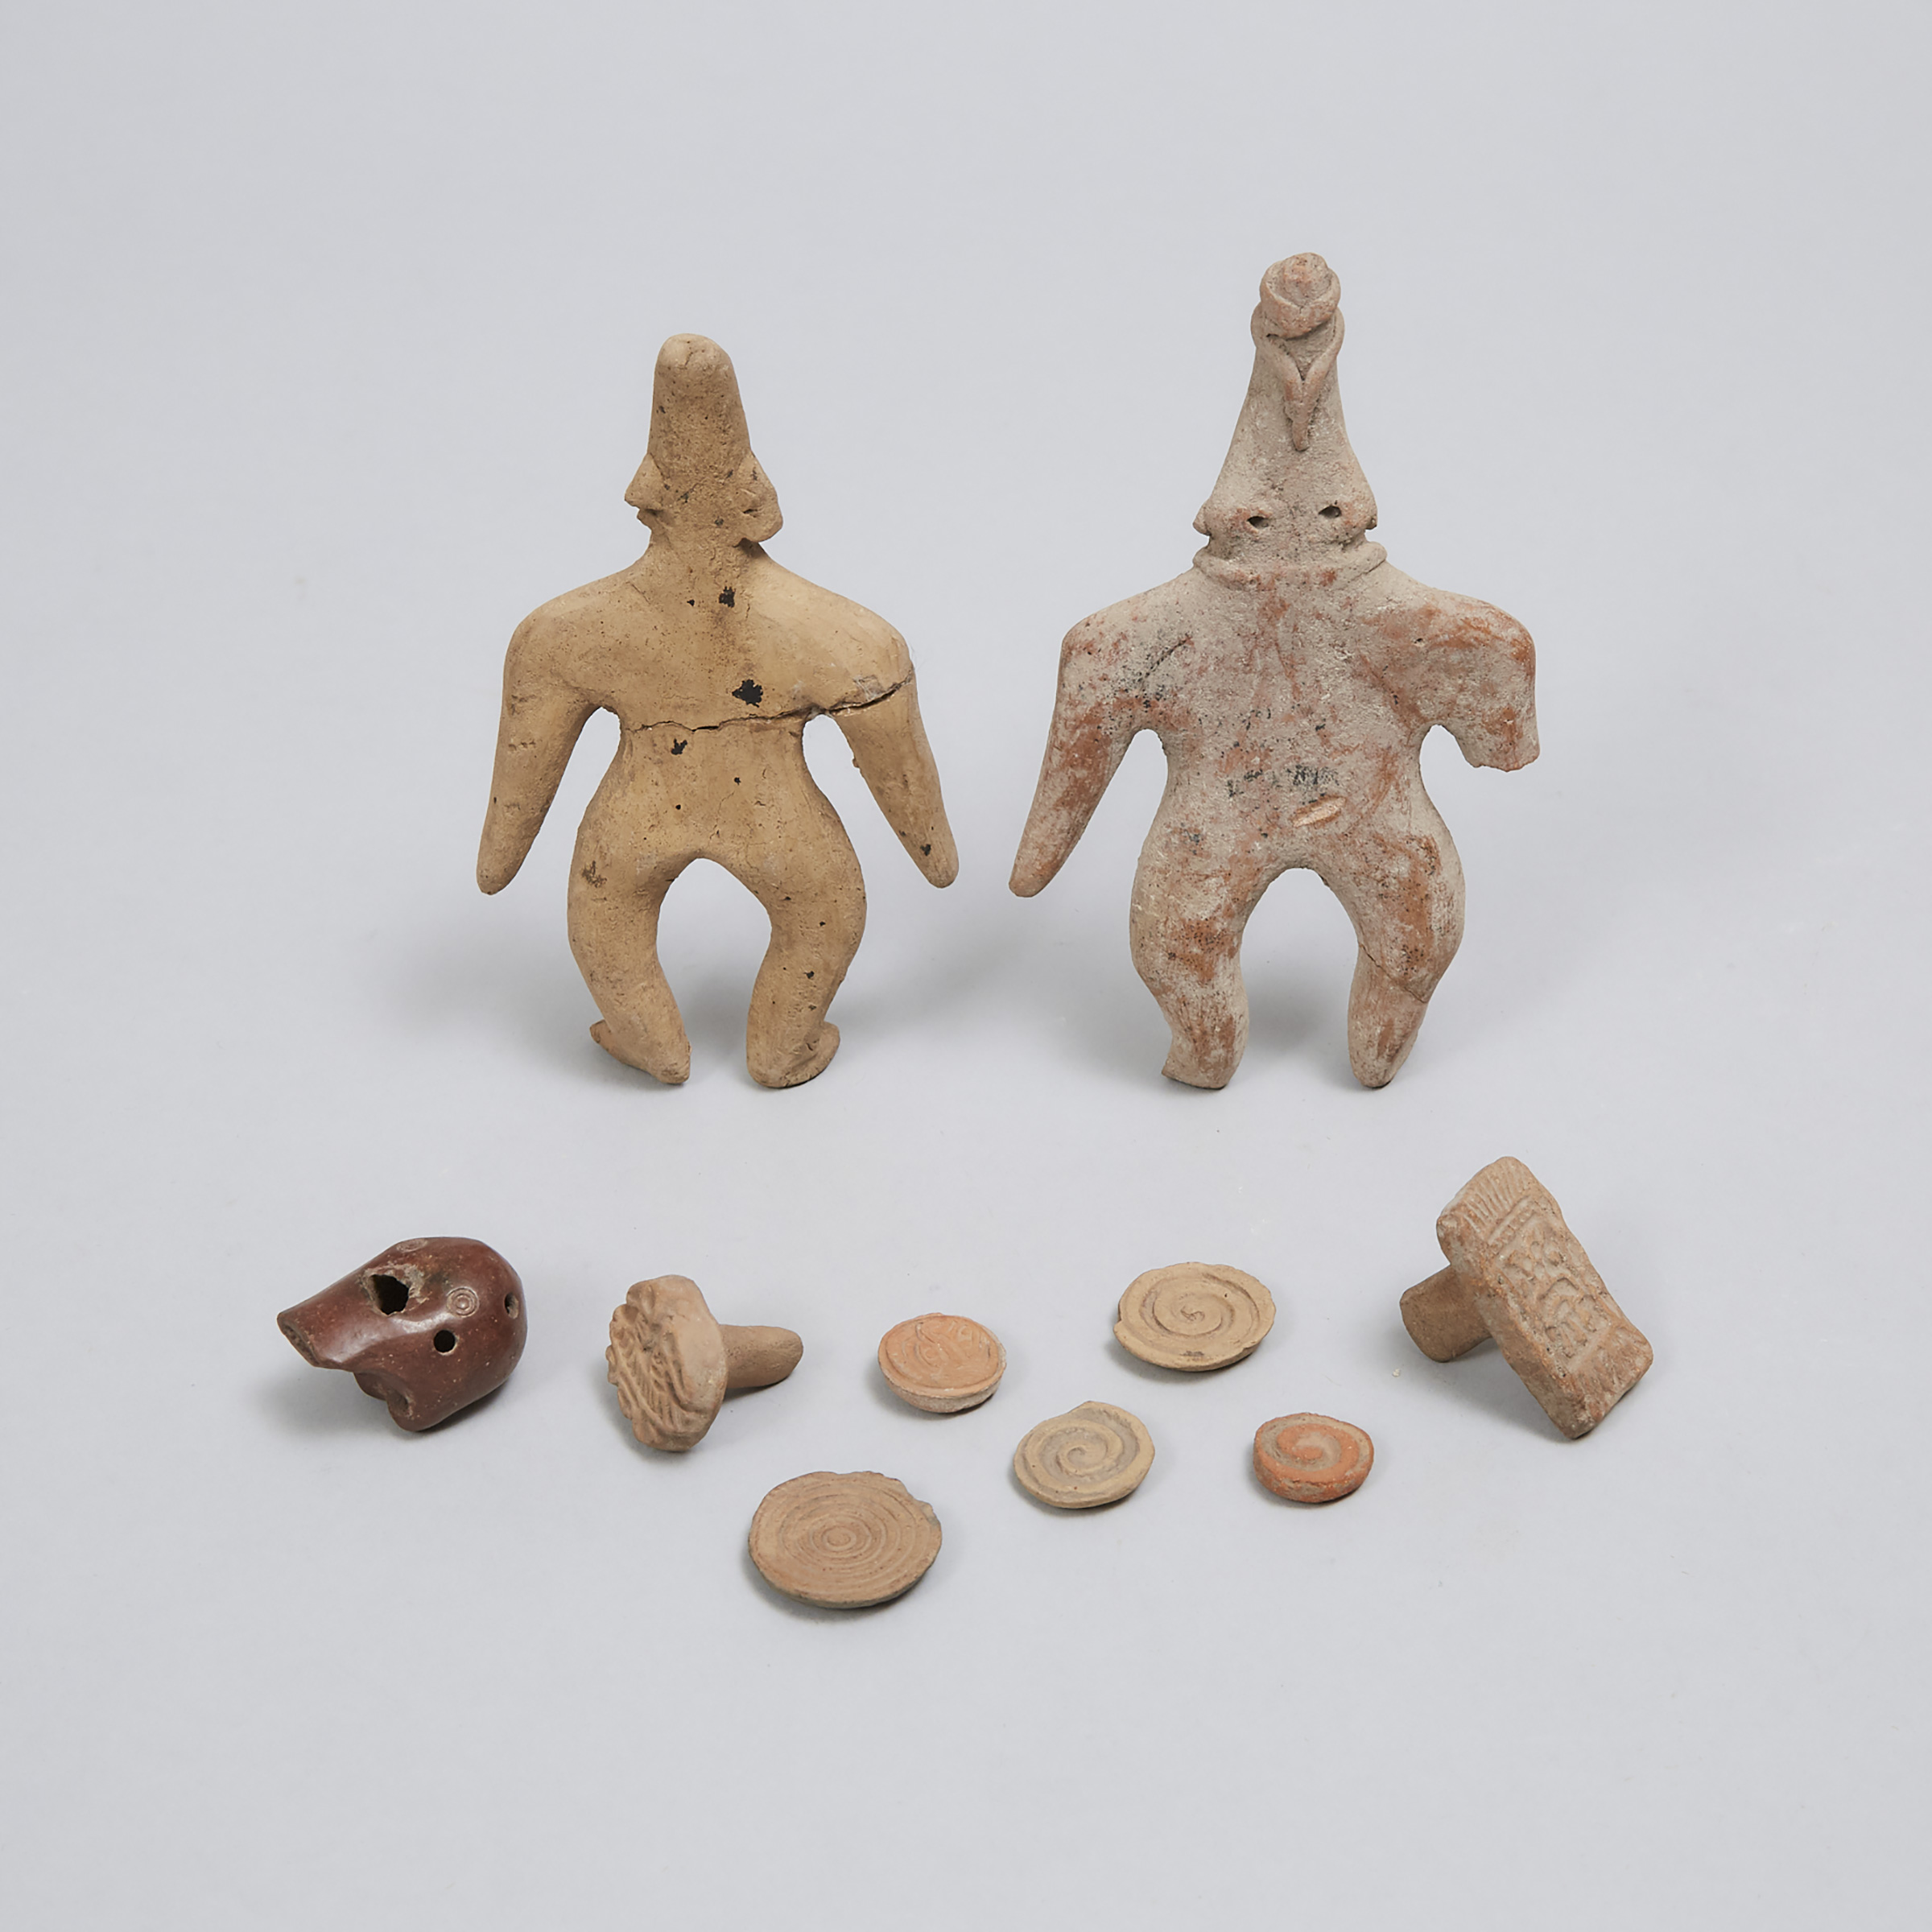 Group of Pre-Columbian Pottery, West Mexico, early 1st Millennium 